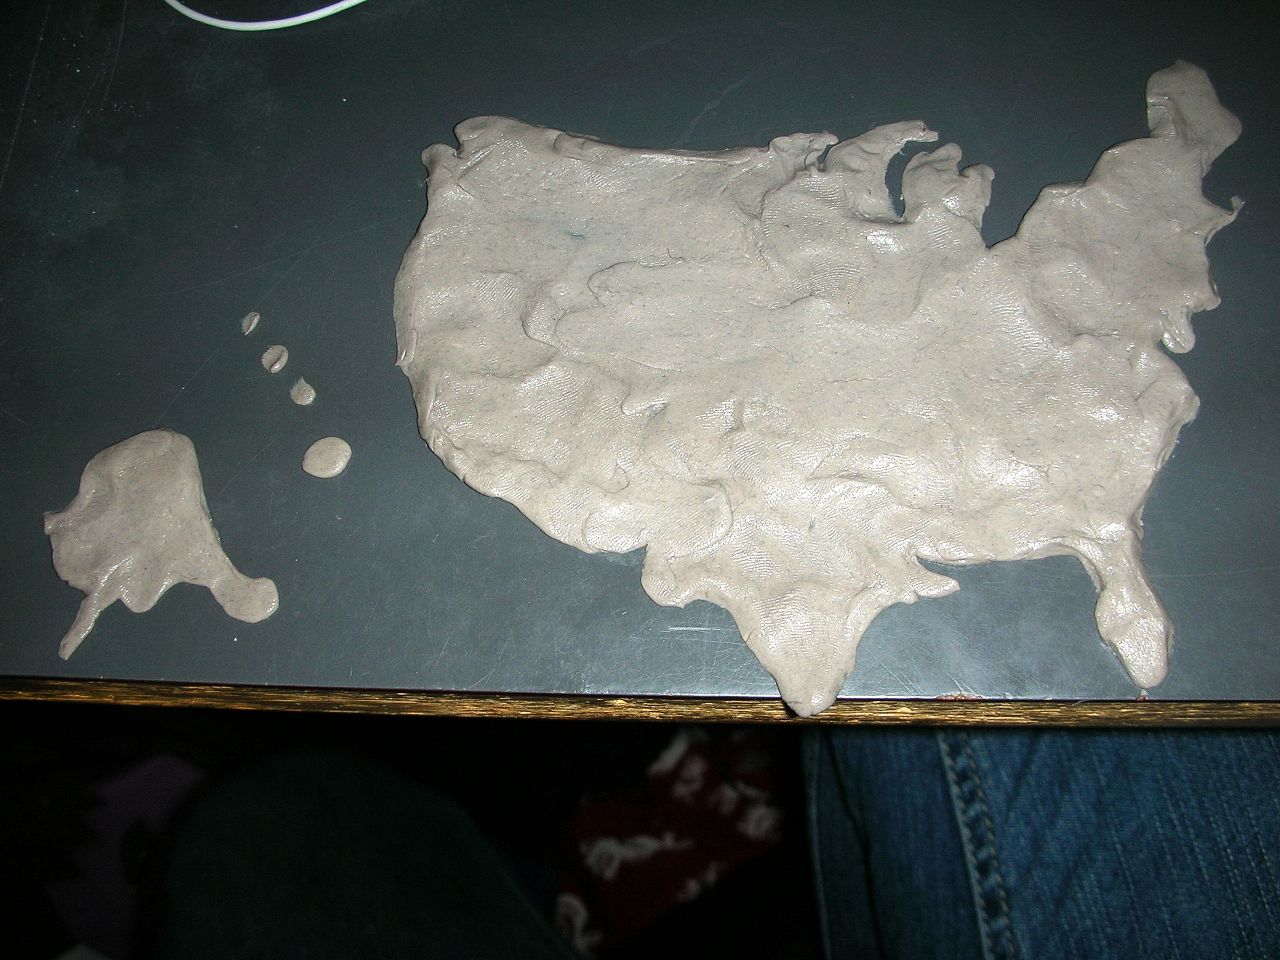 the white powder is shaped to look like the united states